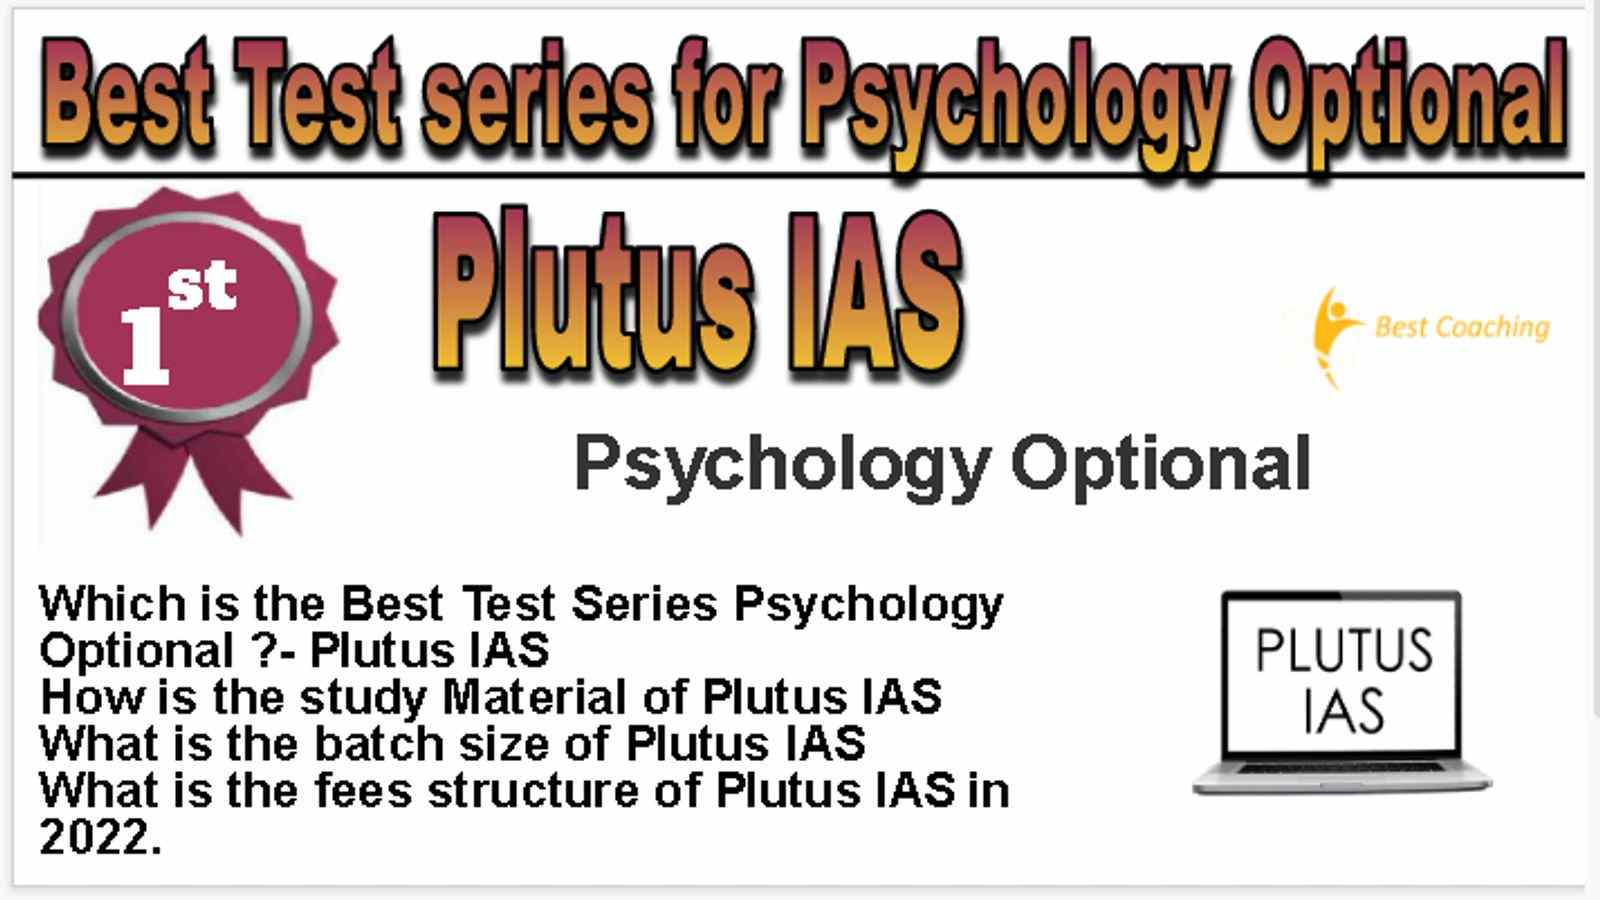 Rank 1 Best Test series for Psychology Optional